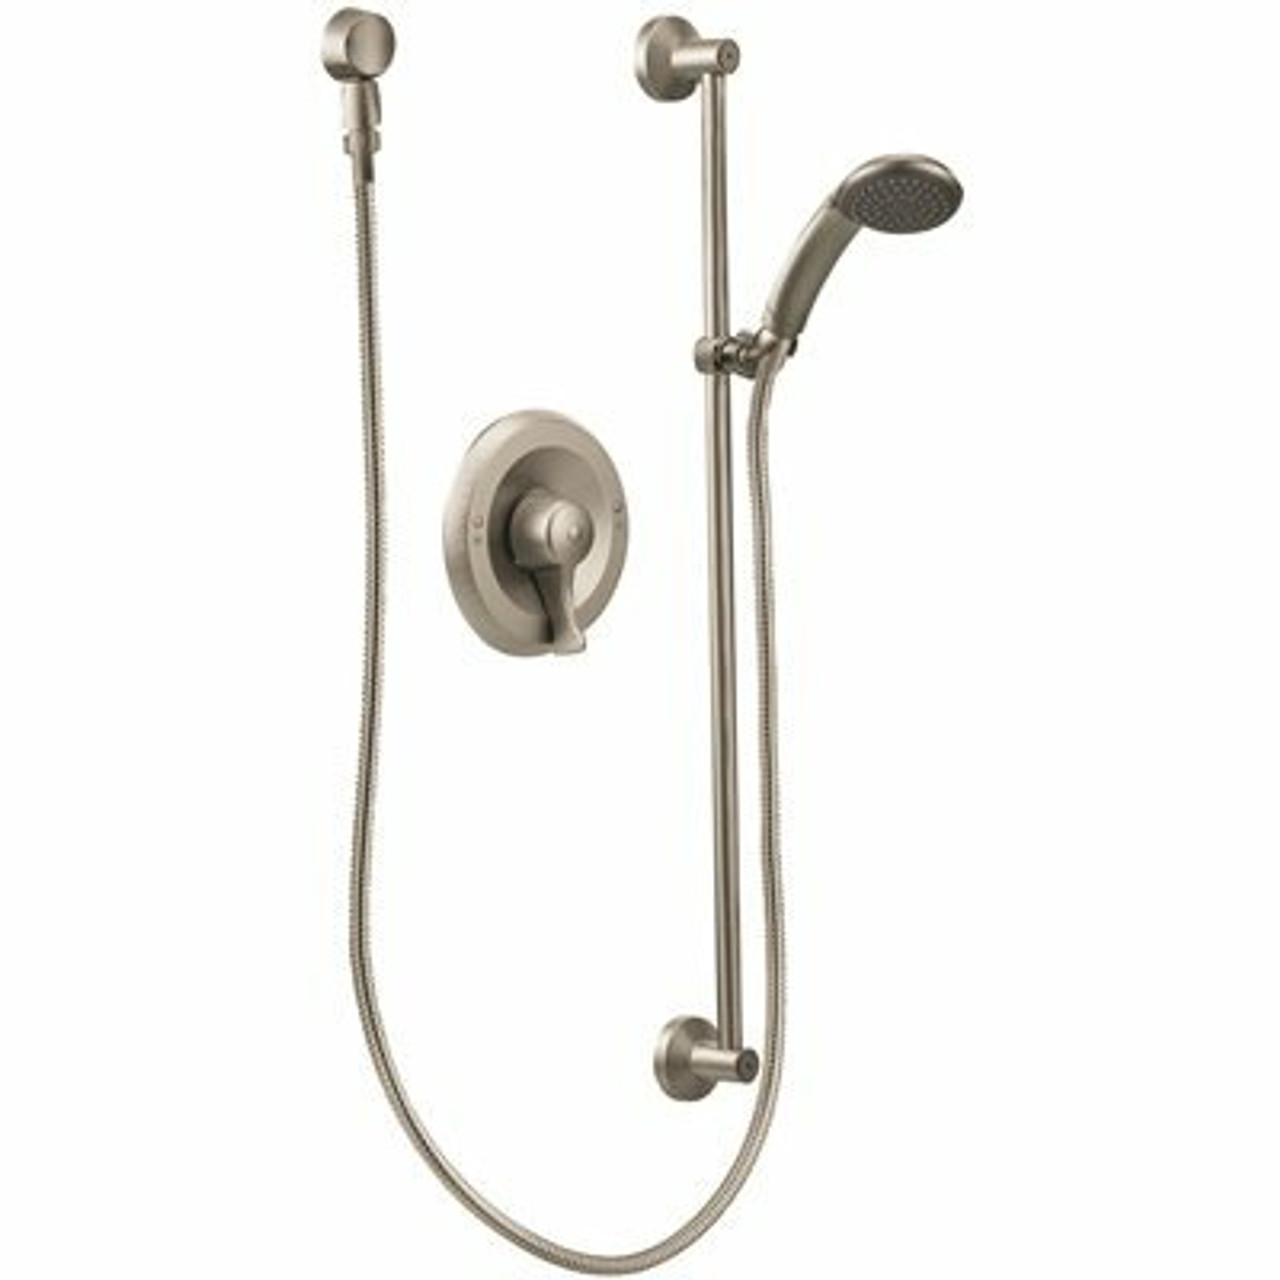 Moen Moen Commercial Posi-Temp Handheld Shower Trim Kit Without Valve, 1.5 Gpm, Lever Handle, Brushed Nickel